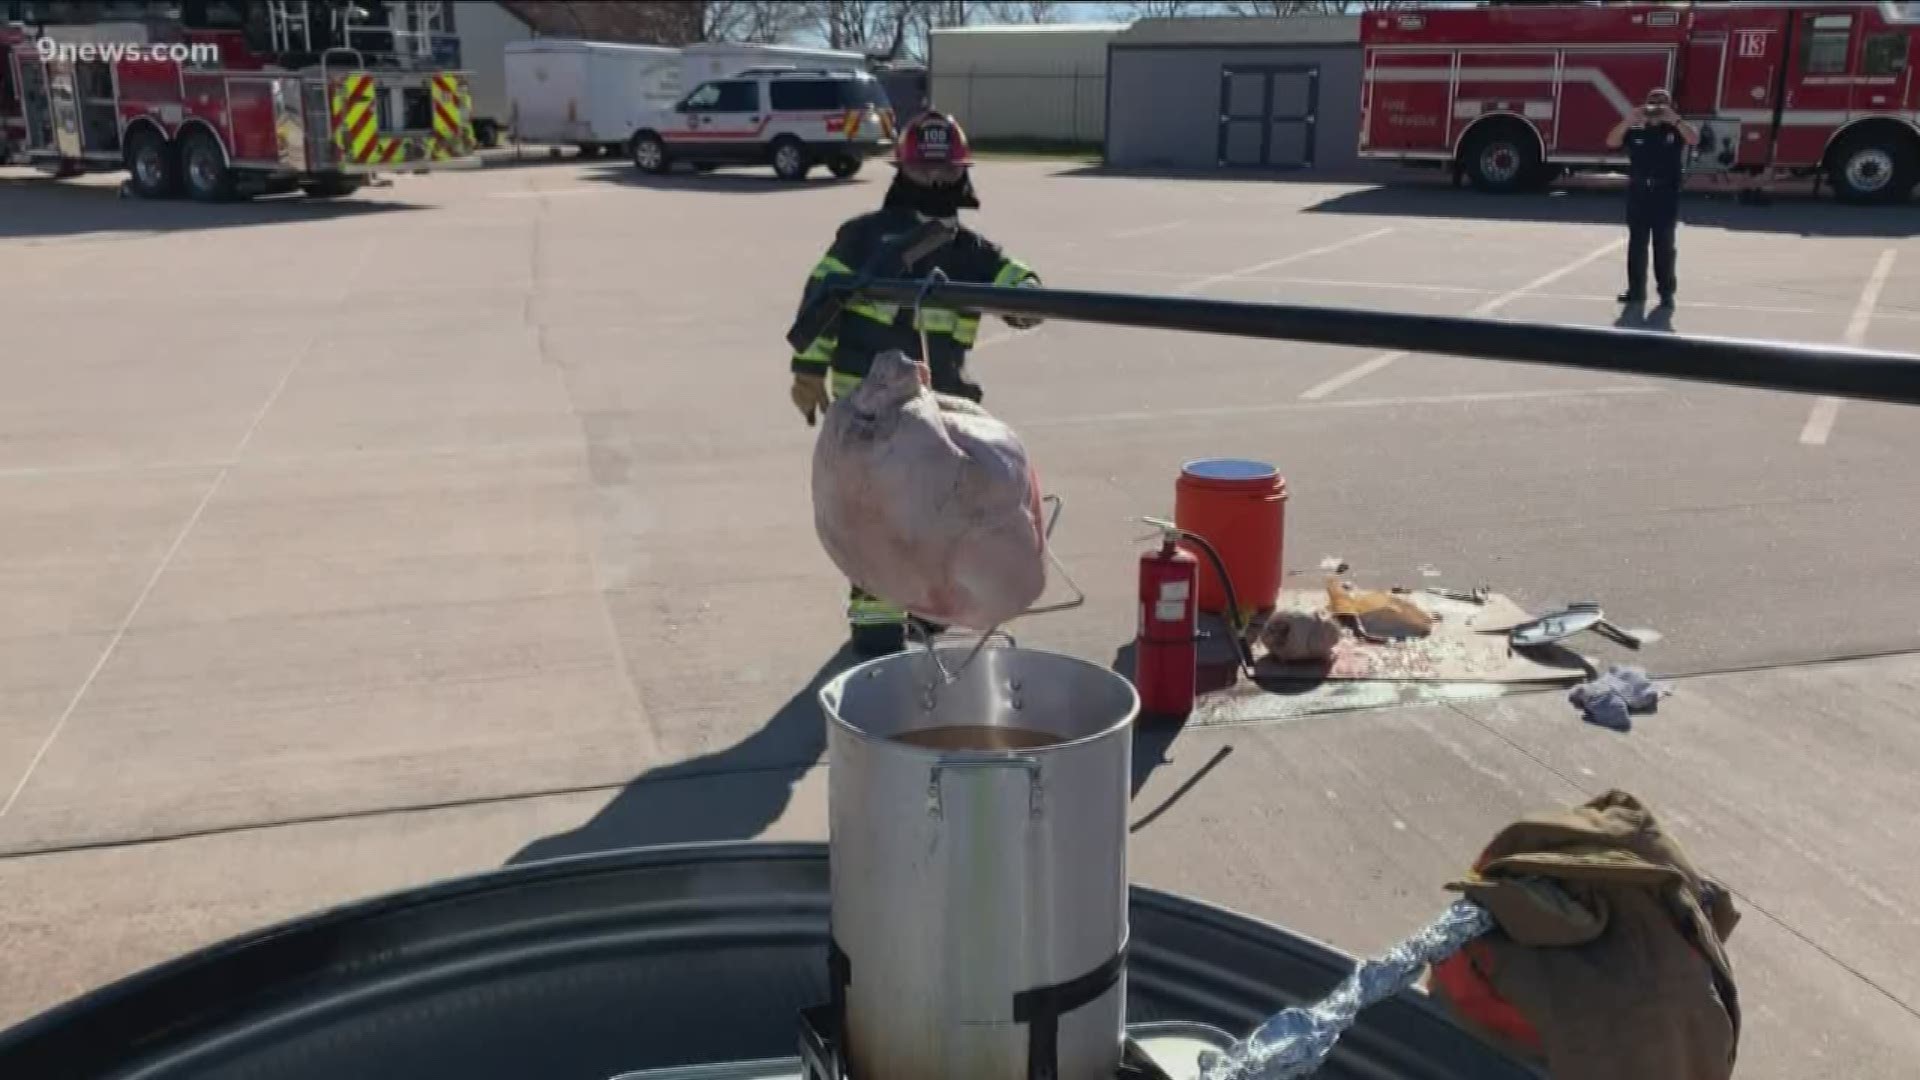 We talked to the people who usually put out turkey fryer fires about how to keep your family safe this Thanksgiving.